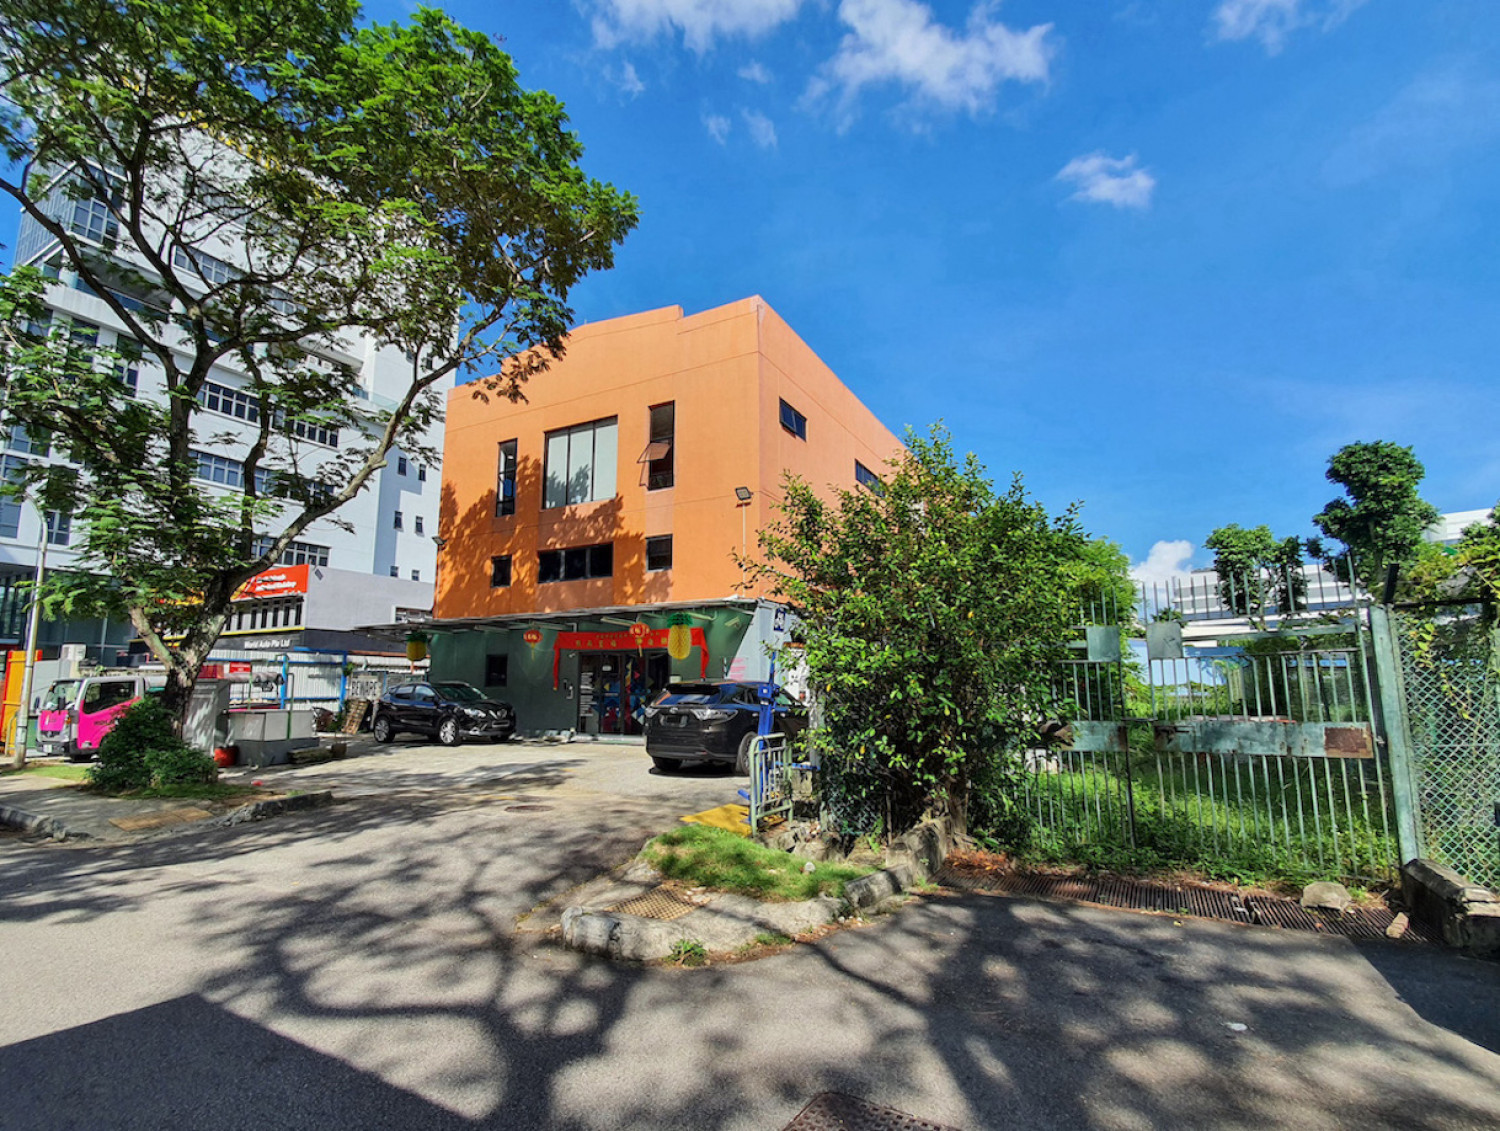 Freehold industrial land at Kim Chuan Lane for sale at $43 mil - Property News